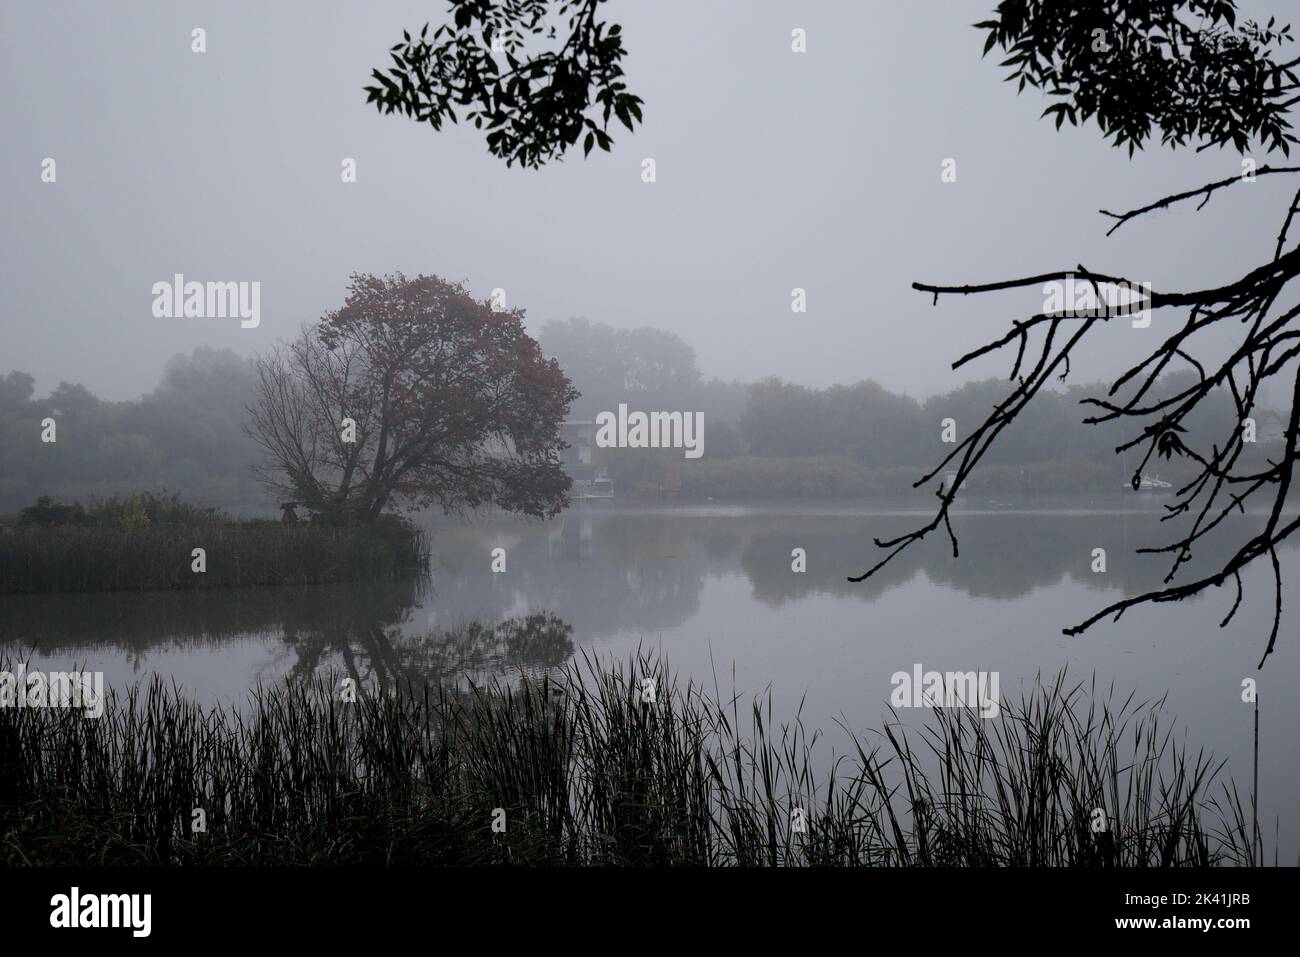 Early morning fog on a cold autumn day on the River Danube, Szigethalom, Hungary Stock Photo